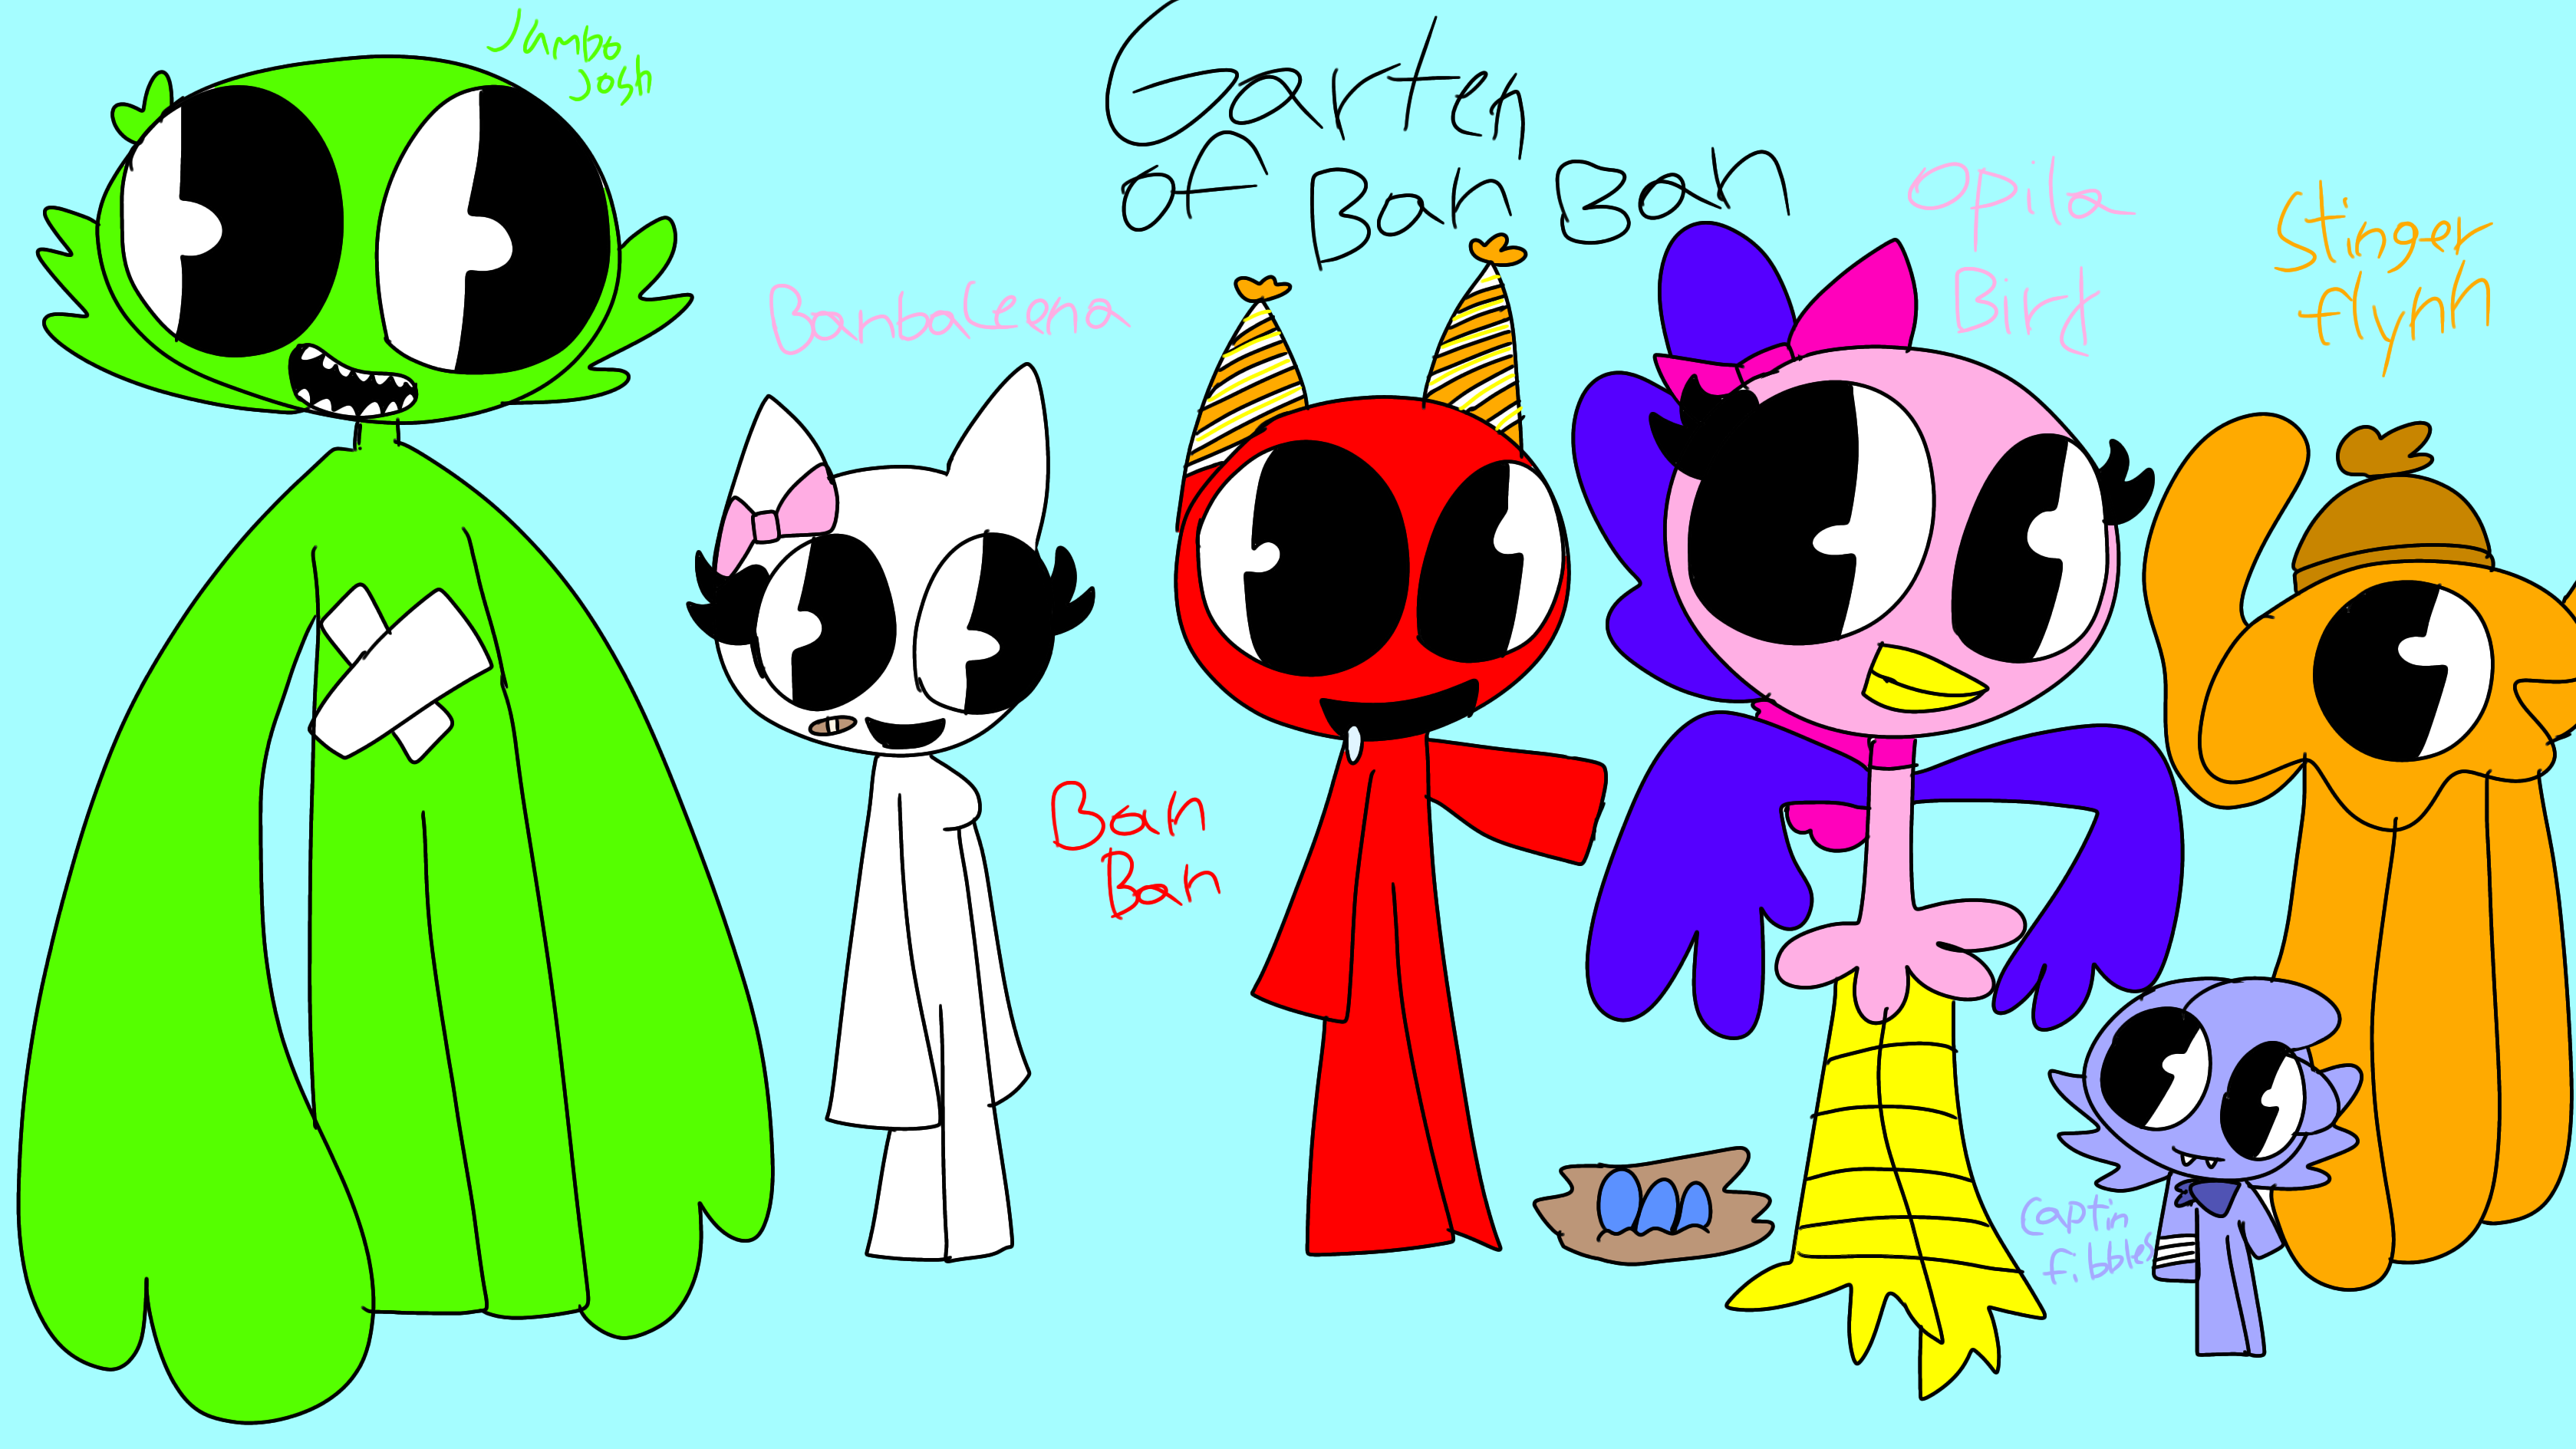 Garten of banban characters in my style! by C4m3l14dr4ws on DeviantArt